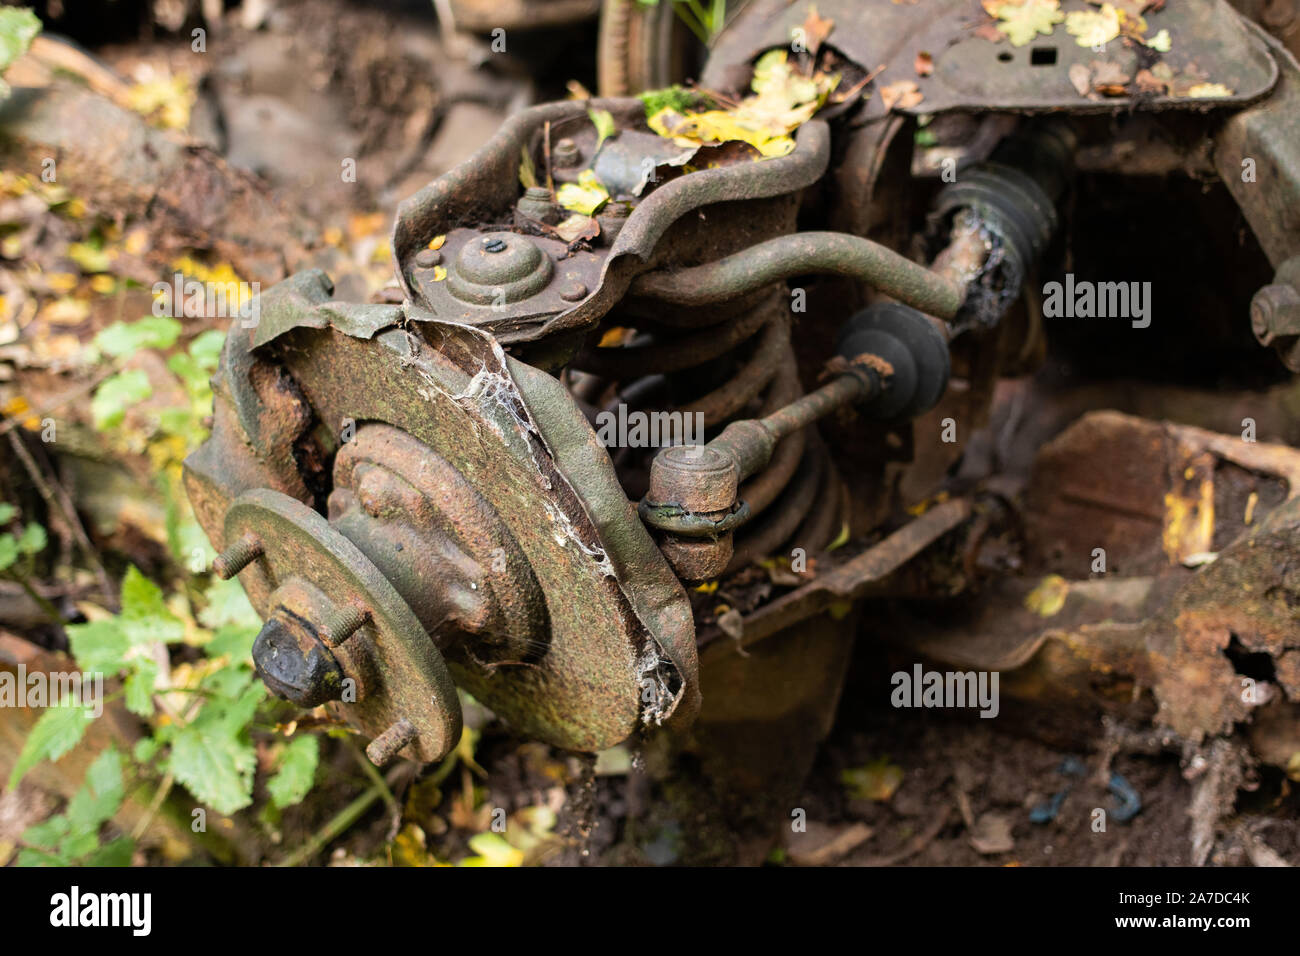 Canal debris lying on the towpath of the Coventry canal near Nuneaton, Warwickshire. Part of a car suspension at the side of the canal, rusting. Stock Photo